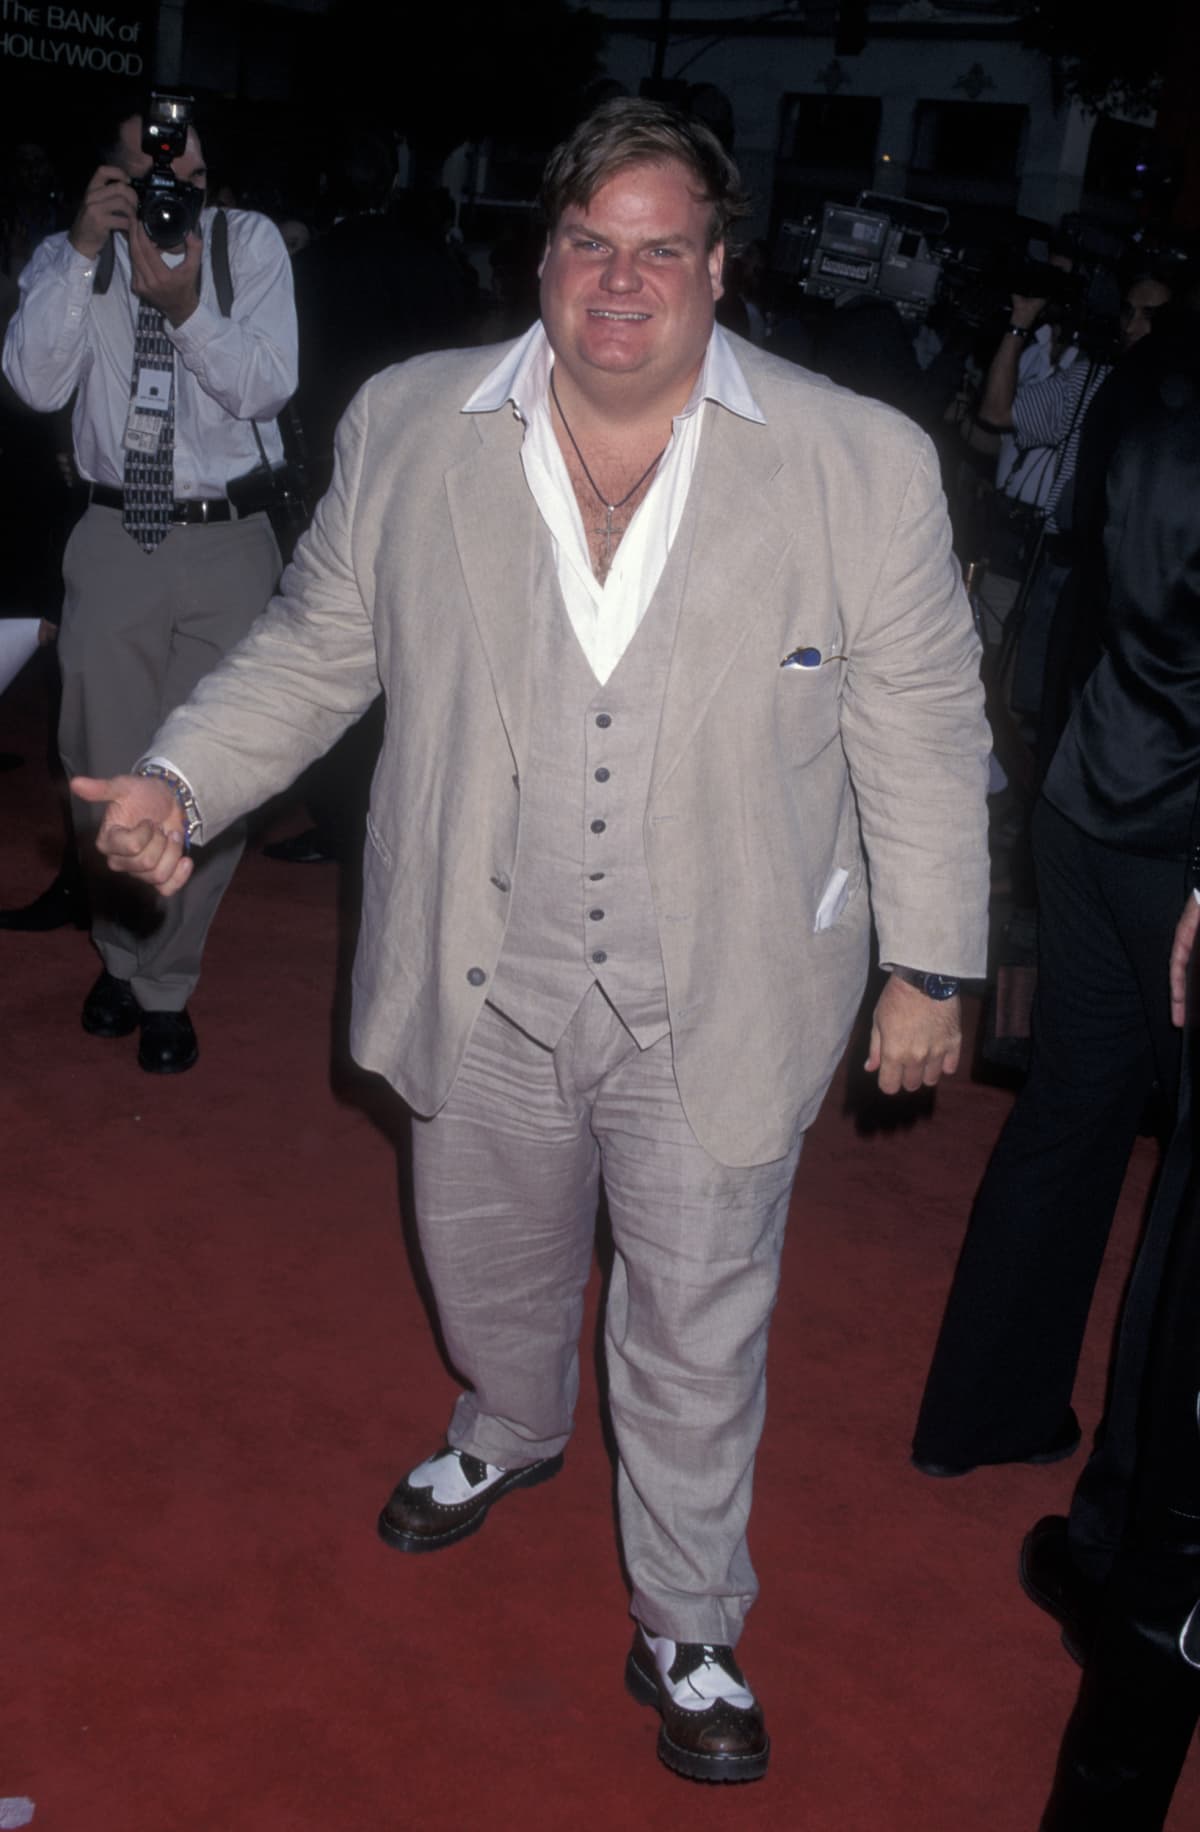 5/11/97. Hollywood,Chris Farley at the premier of " Addicted to Love" premier